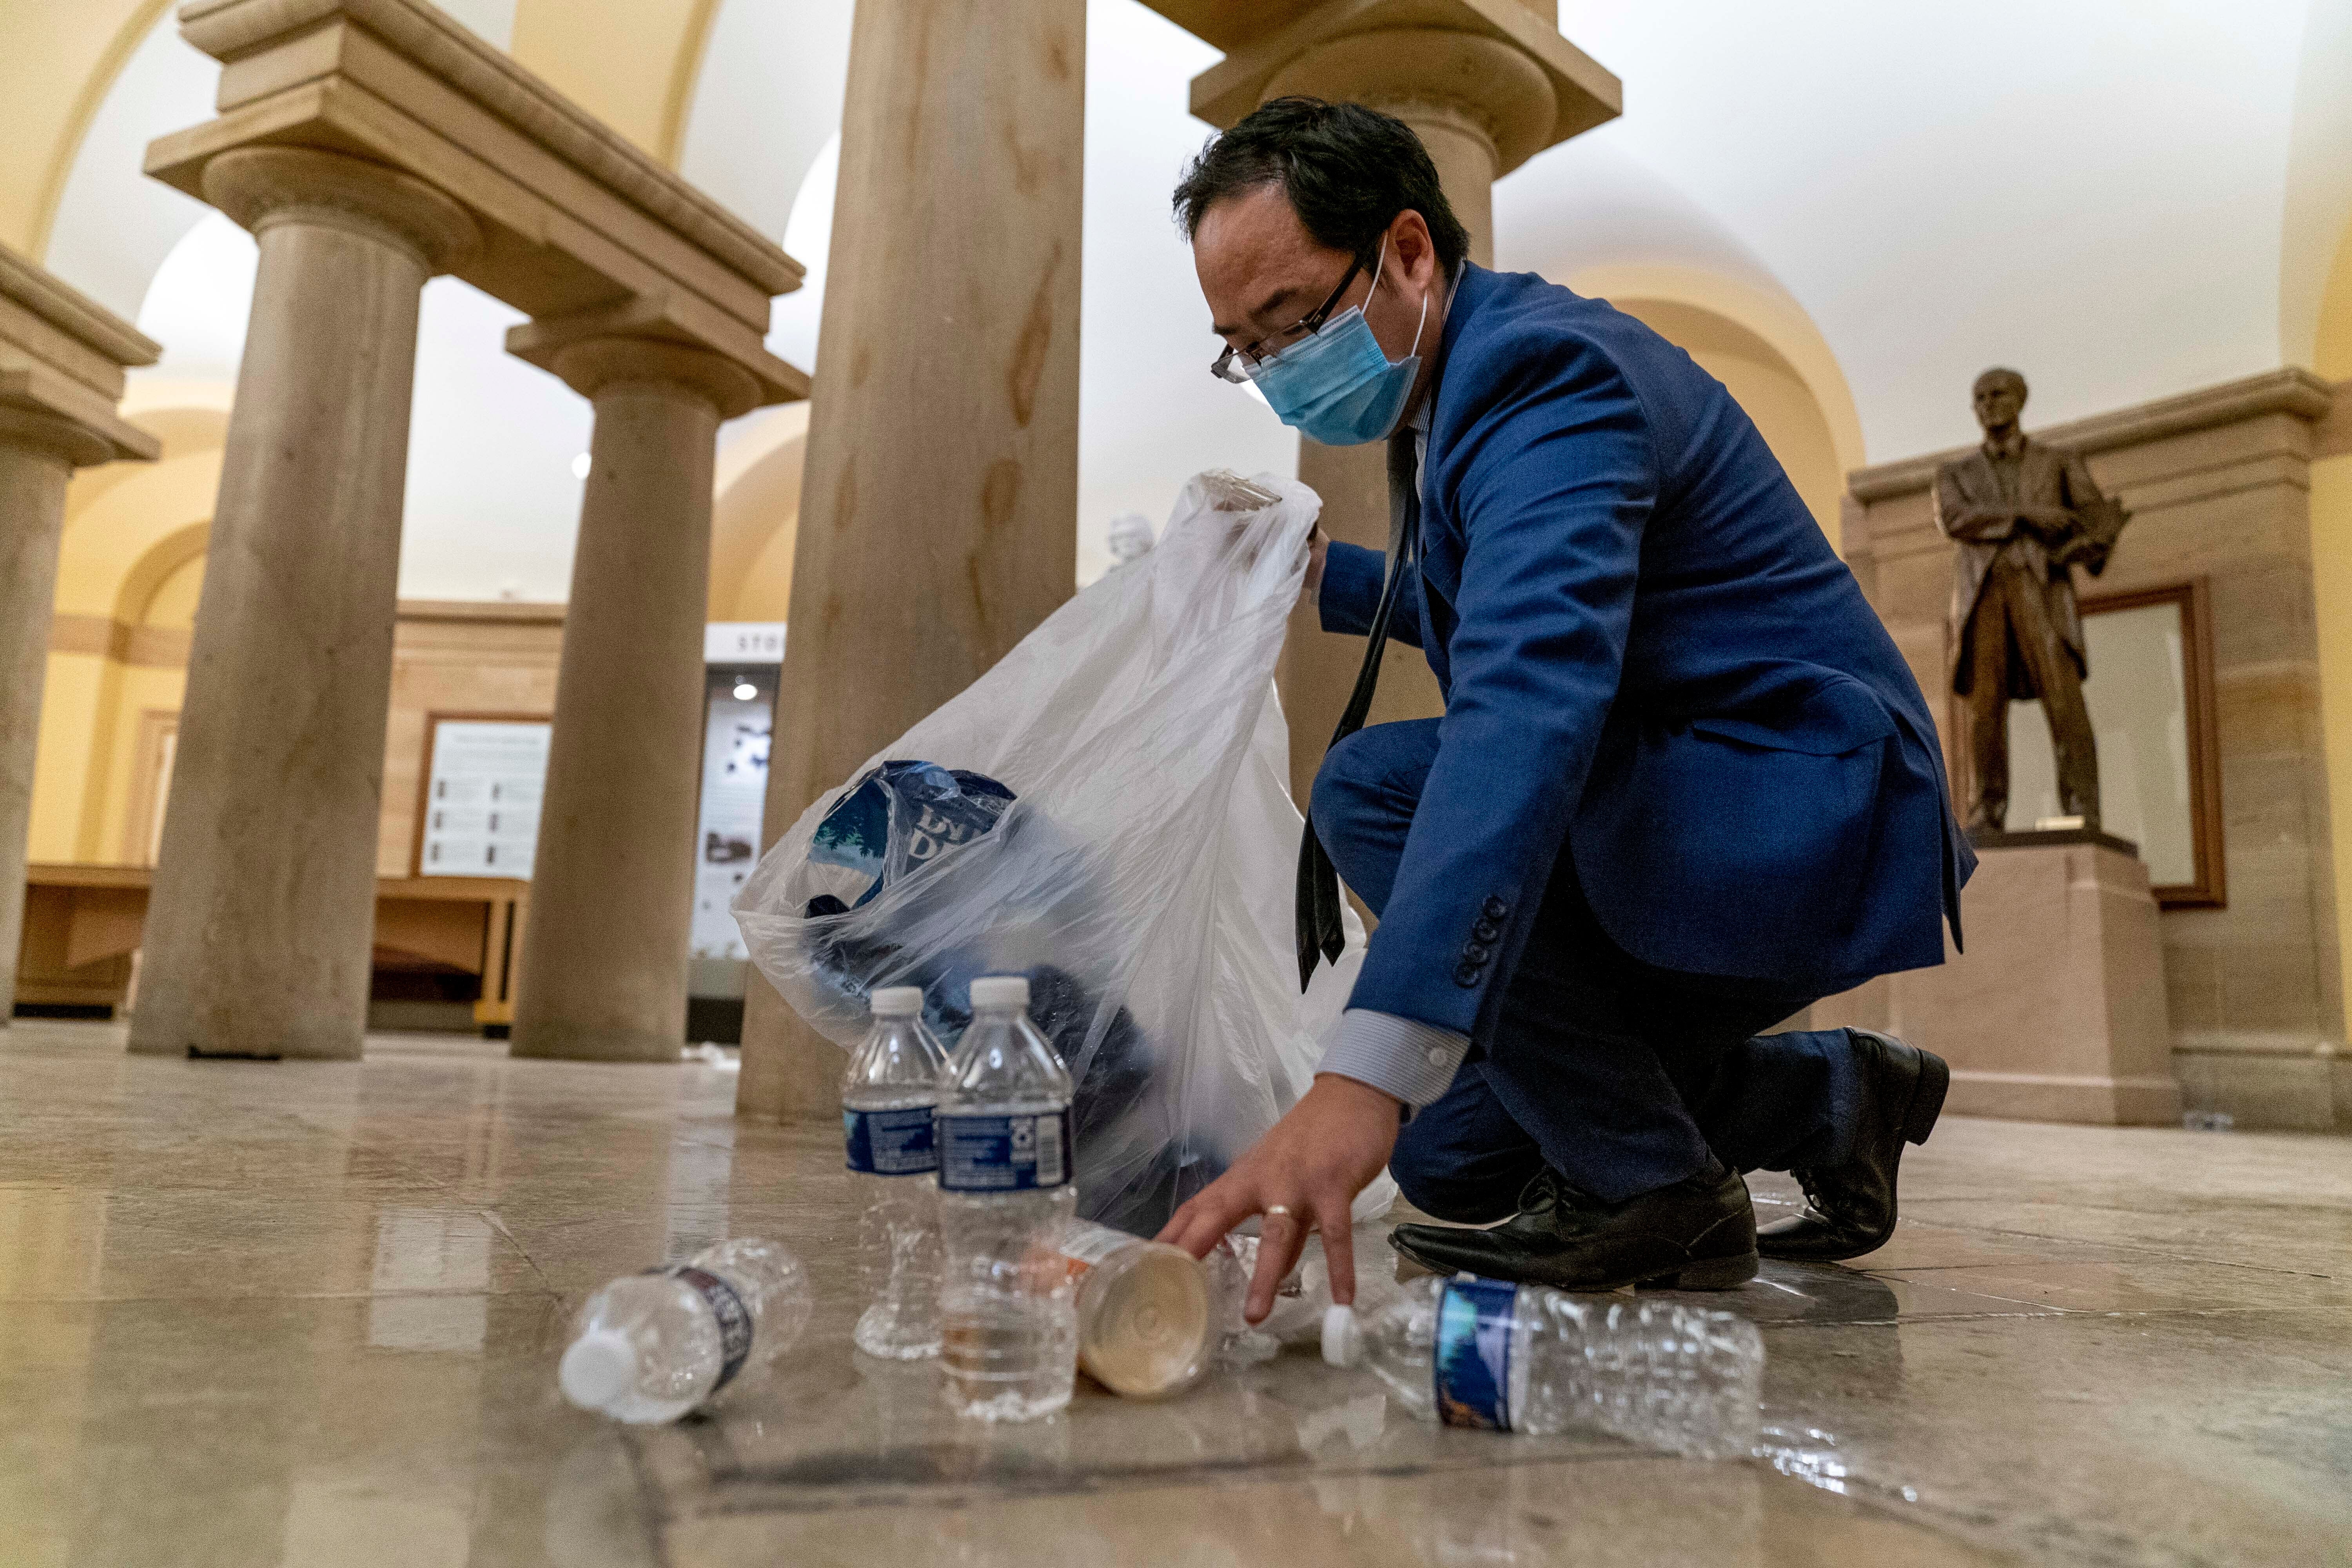 Representative Andy Kim cleans up debris and trash strewn across the floor in the early morning hours of Thursday